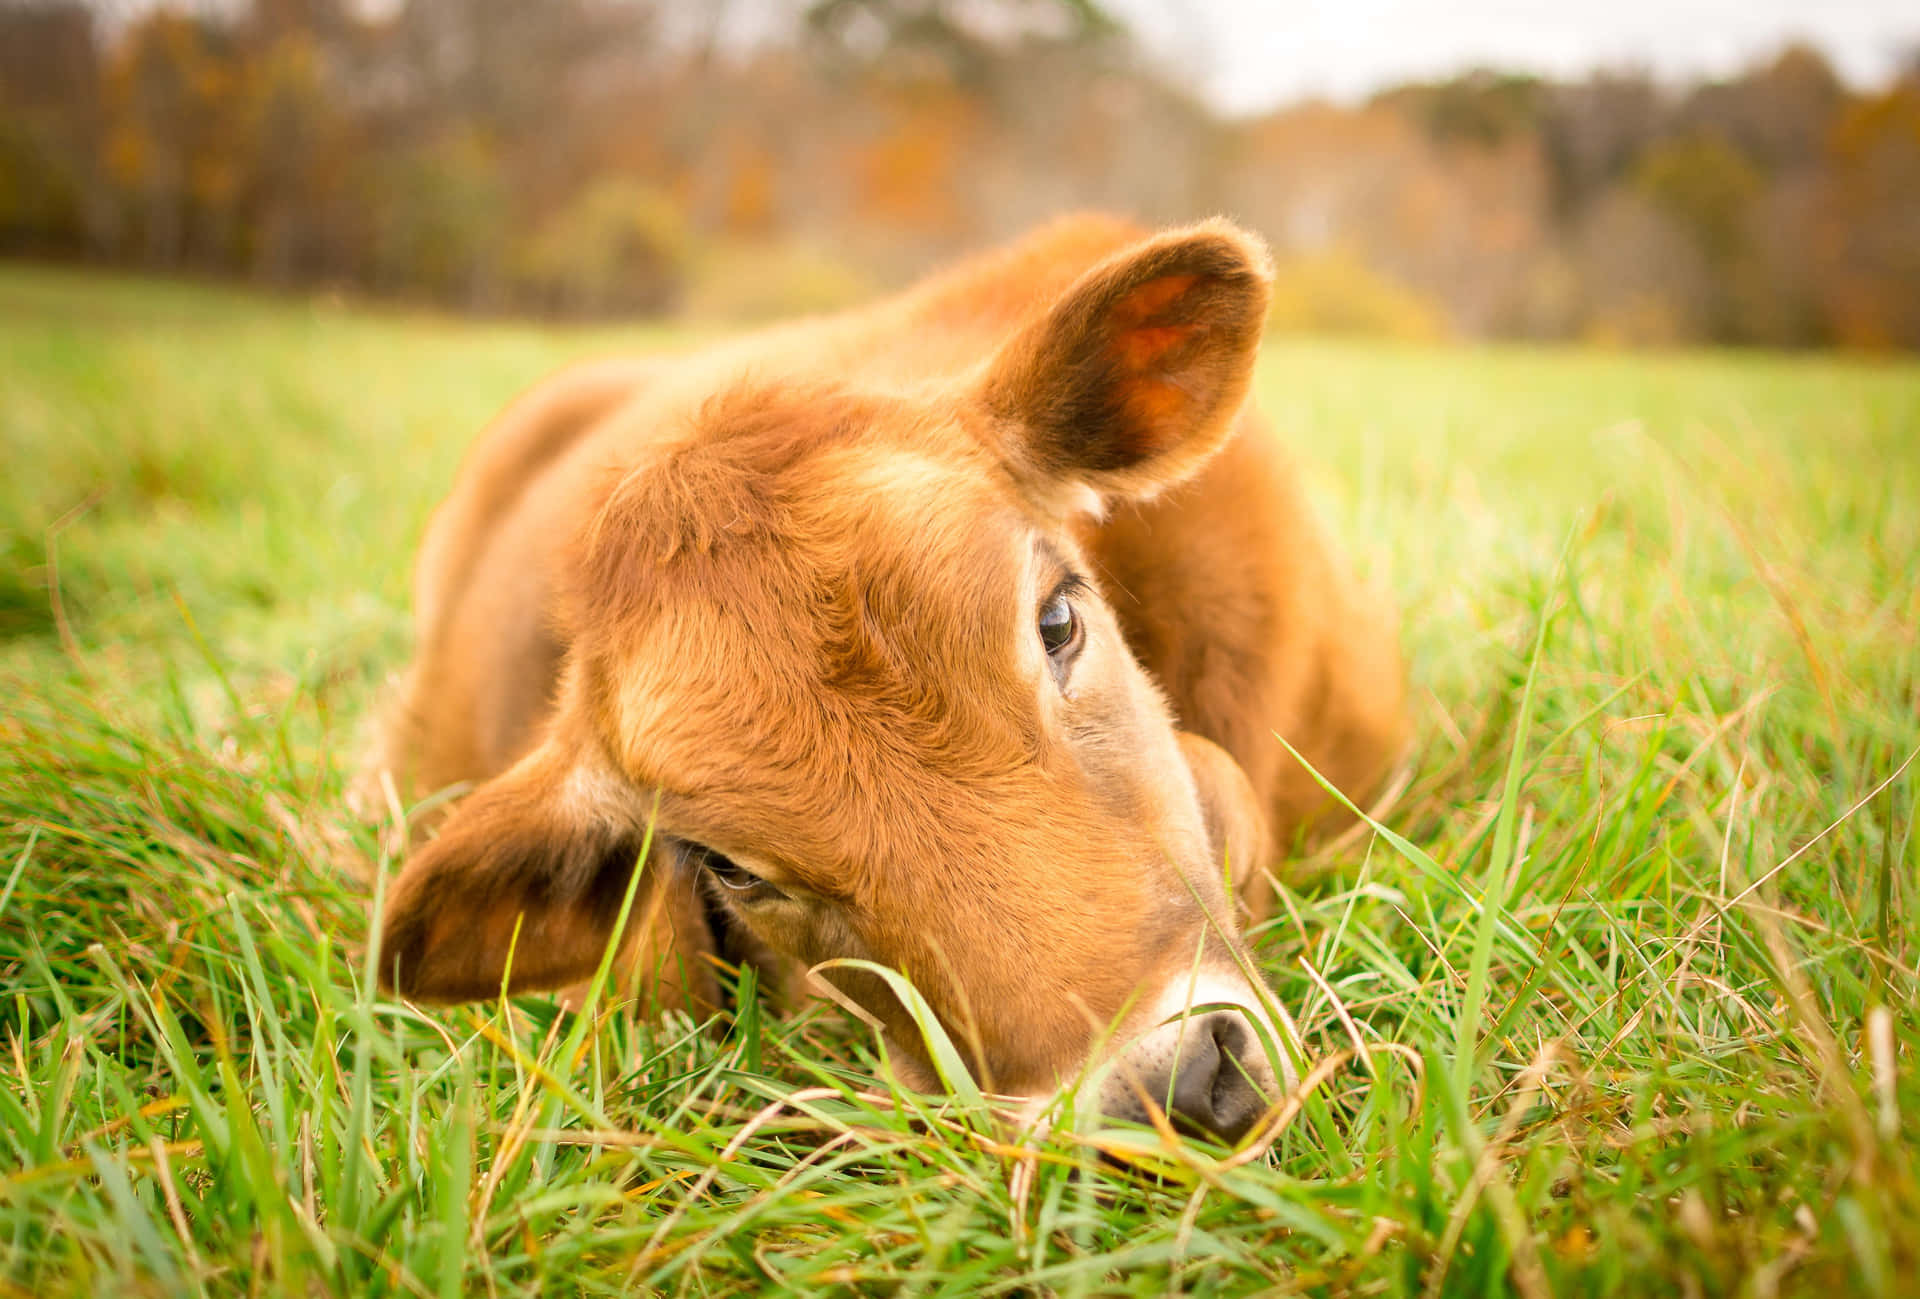 A beautiful brown cow standing in a lush green field Wallpaper